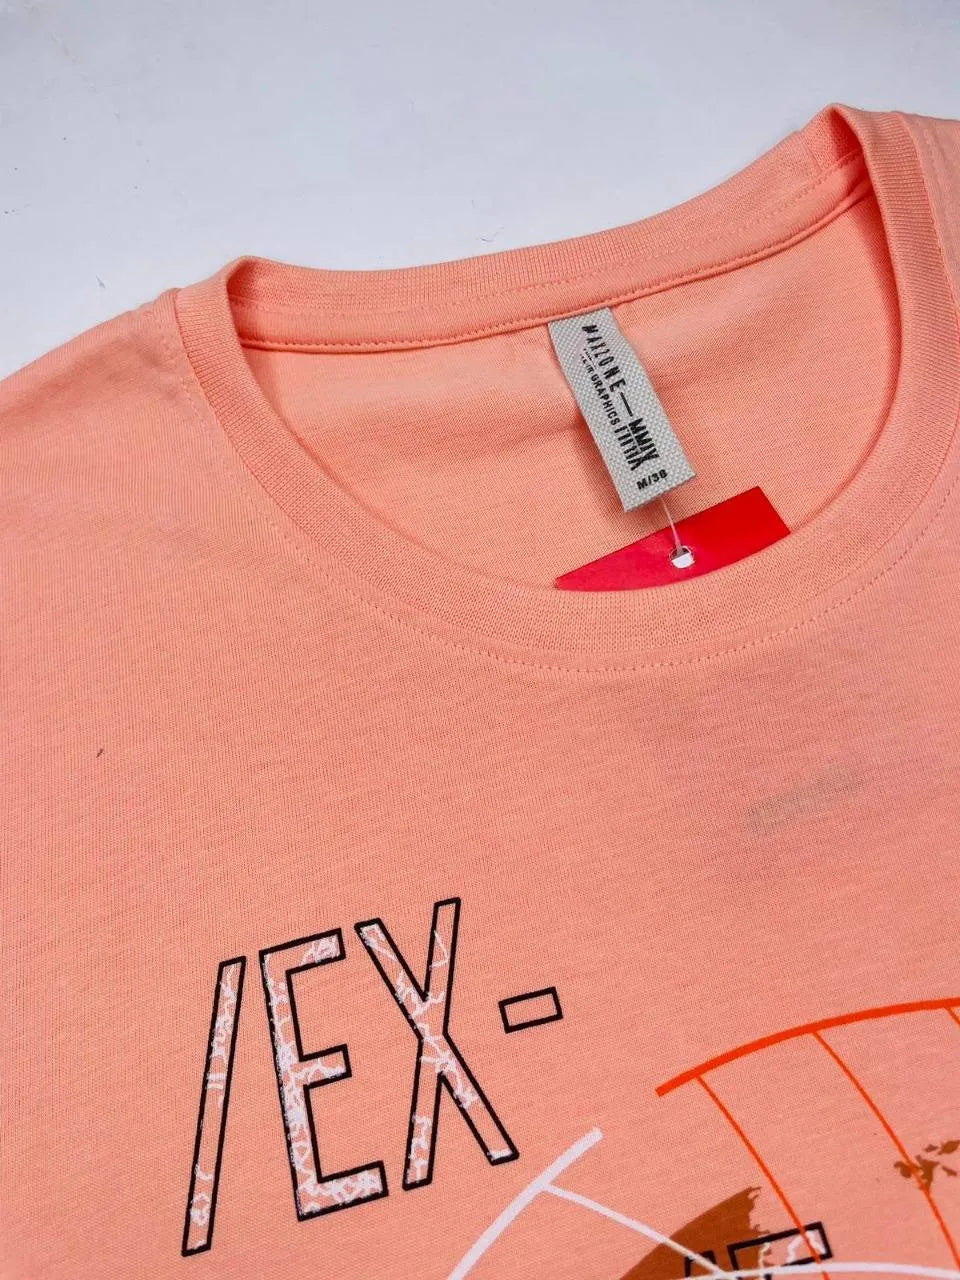 Maxzone graphic tee: Light orange, comfortable, men's fashion.Featuring a unique graphic print, this Maxzone t-shirt is perfect for expressing your personality.